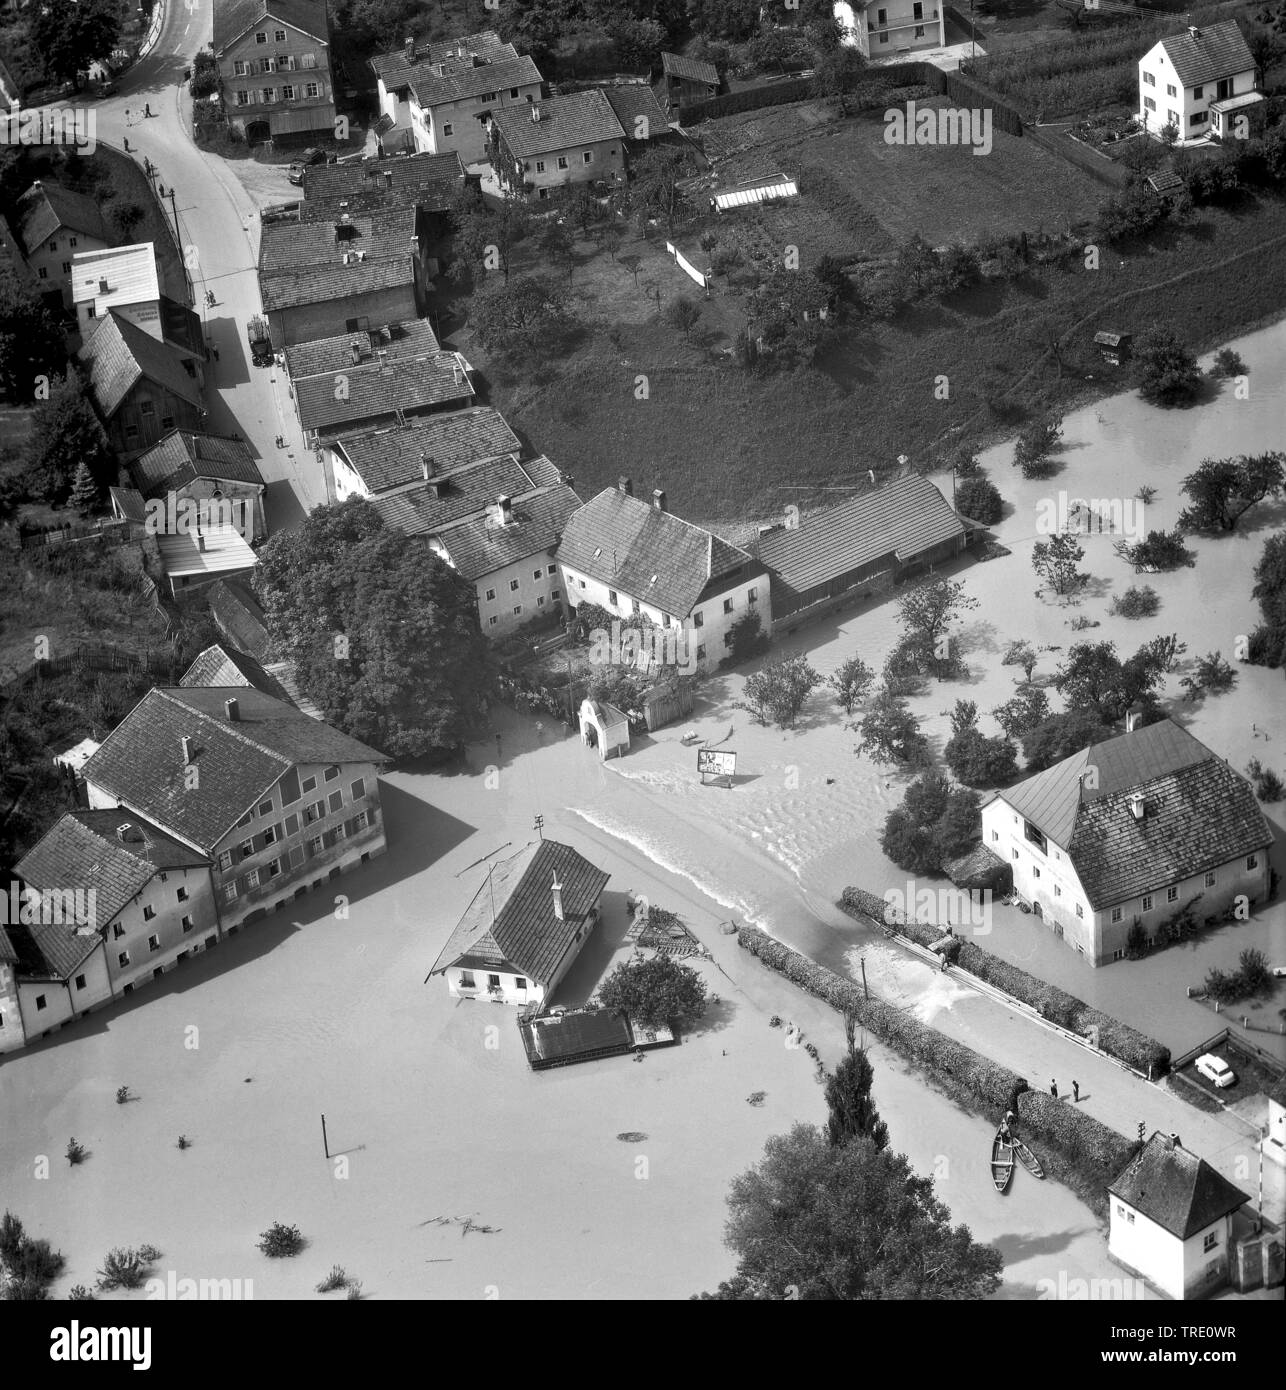 high water at river Salzach at Tittmoning, historical aerial photo from the year 1959, Germany, Bavaria Stock Photo